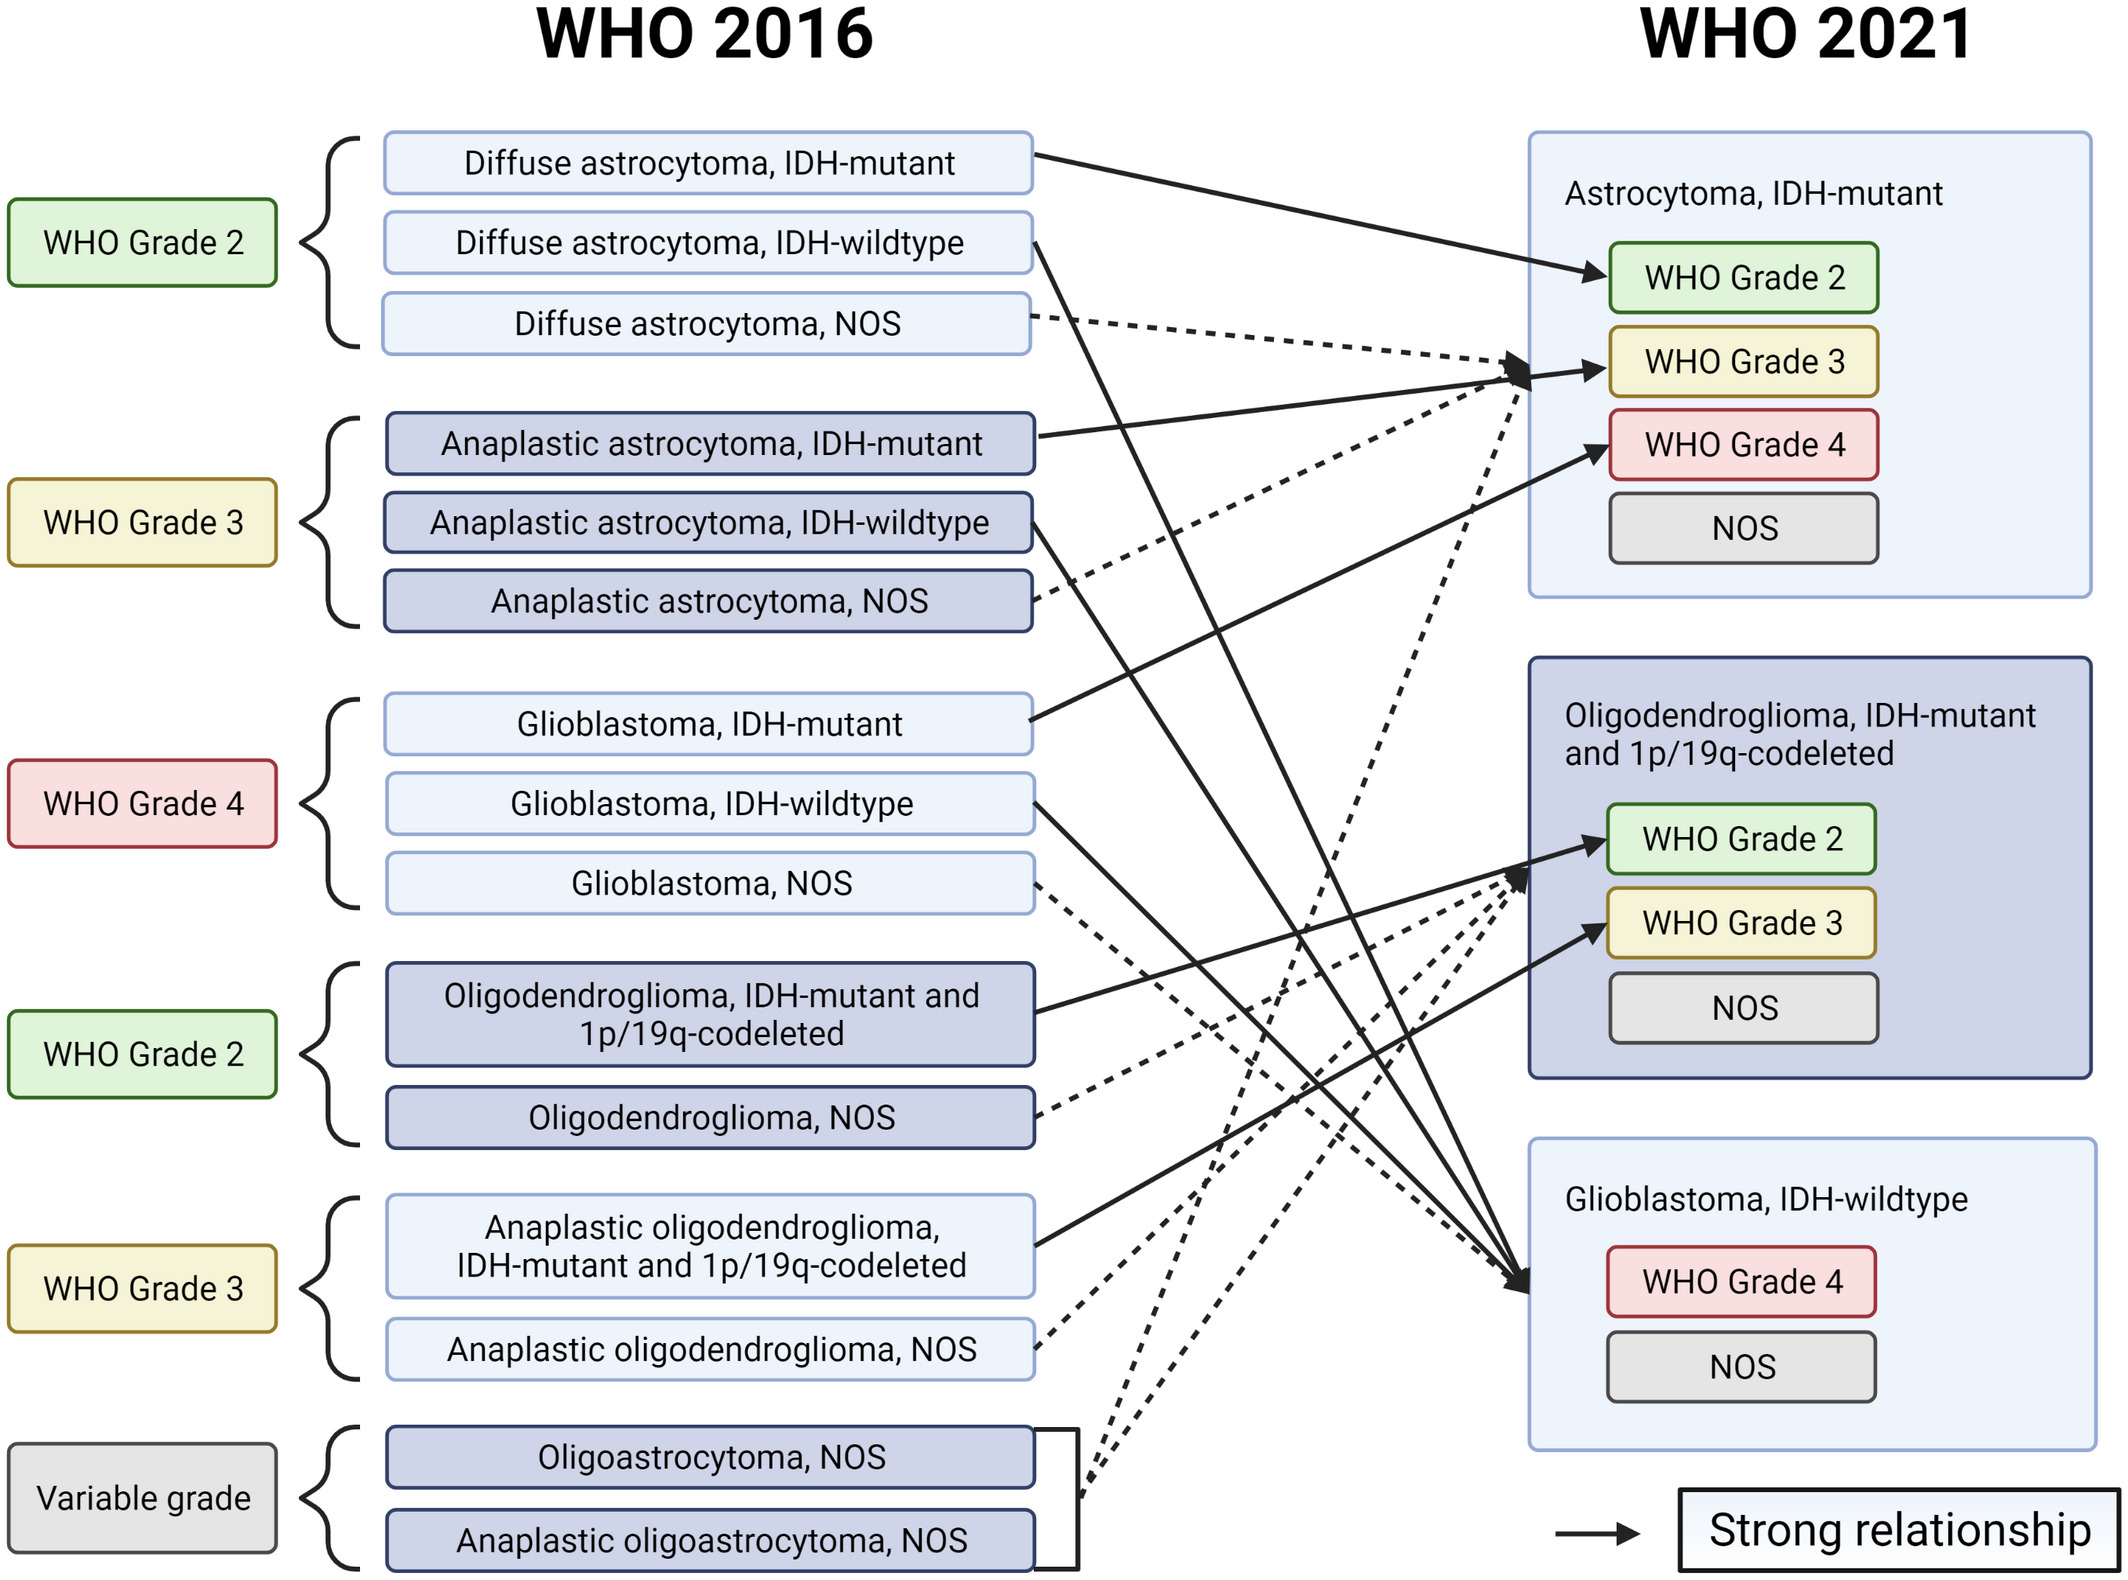 Figure 1 Schematic showing how the disease entities from WHO 2016 is now defined in WHO 2021. (Benjamin, 2022)